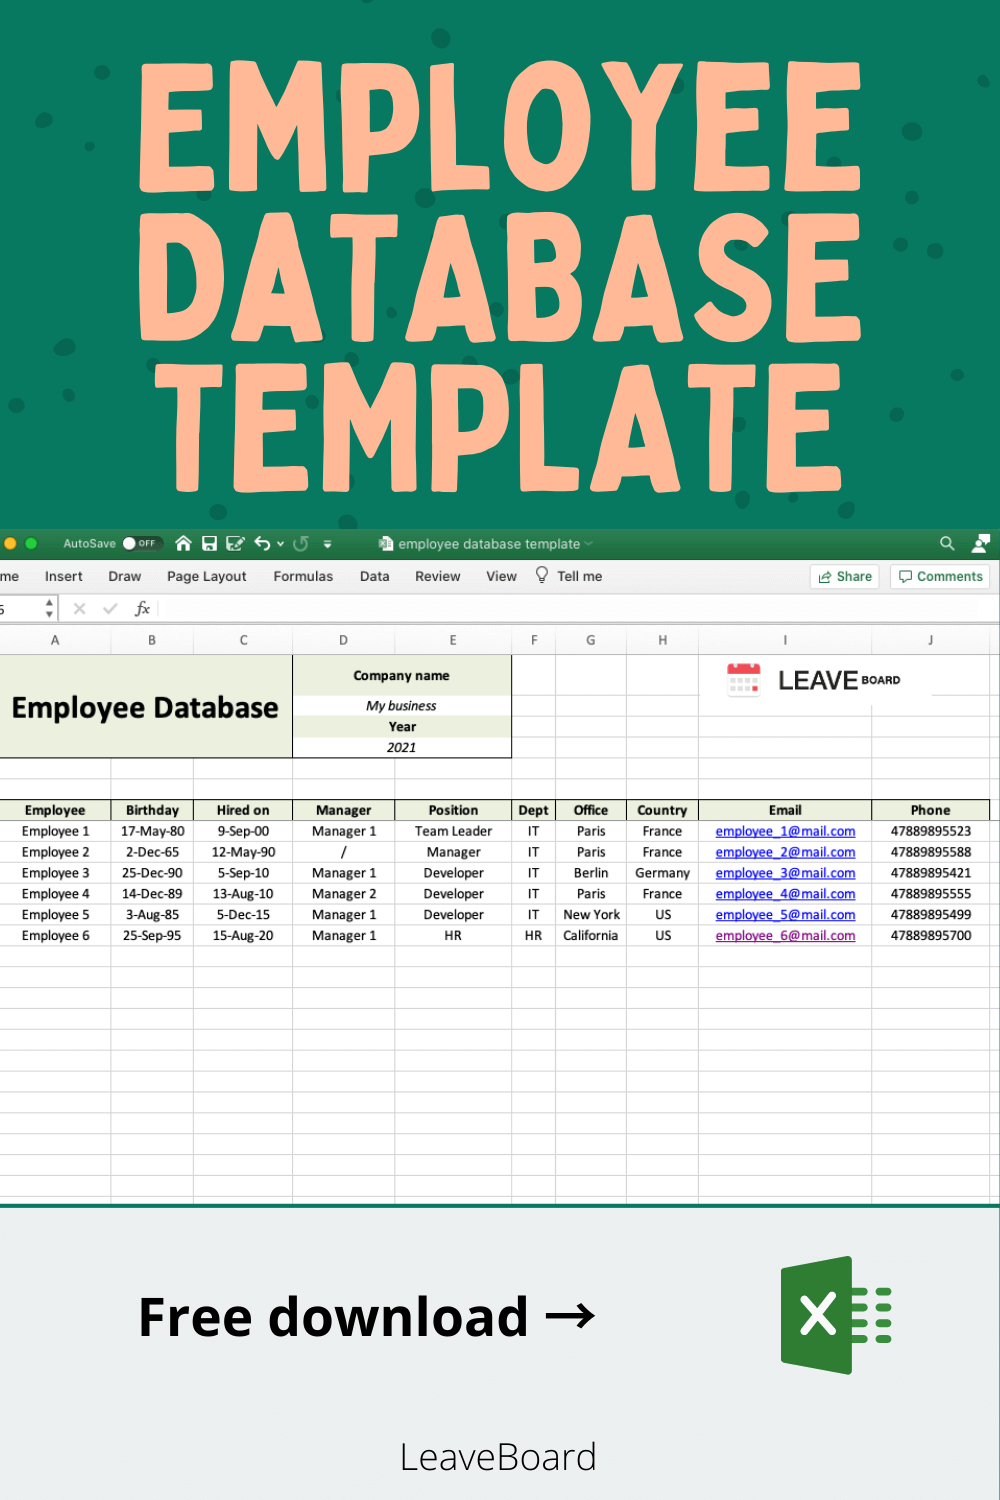 excel database templates